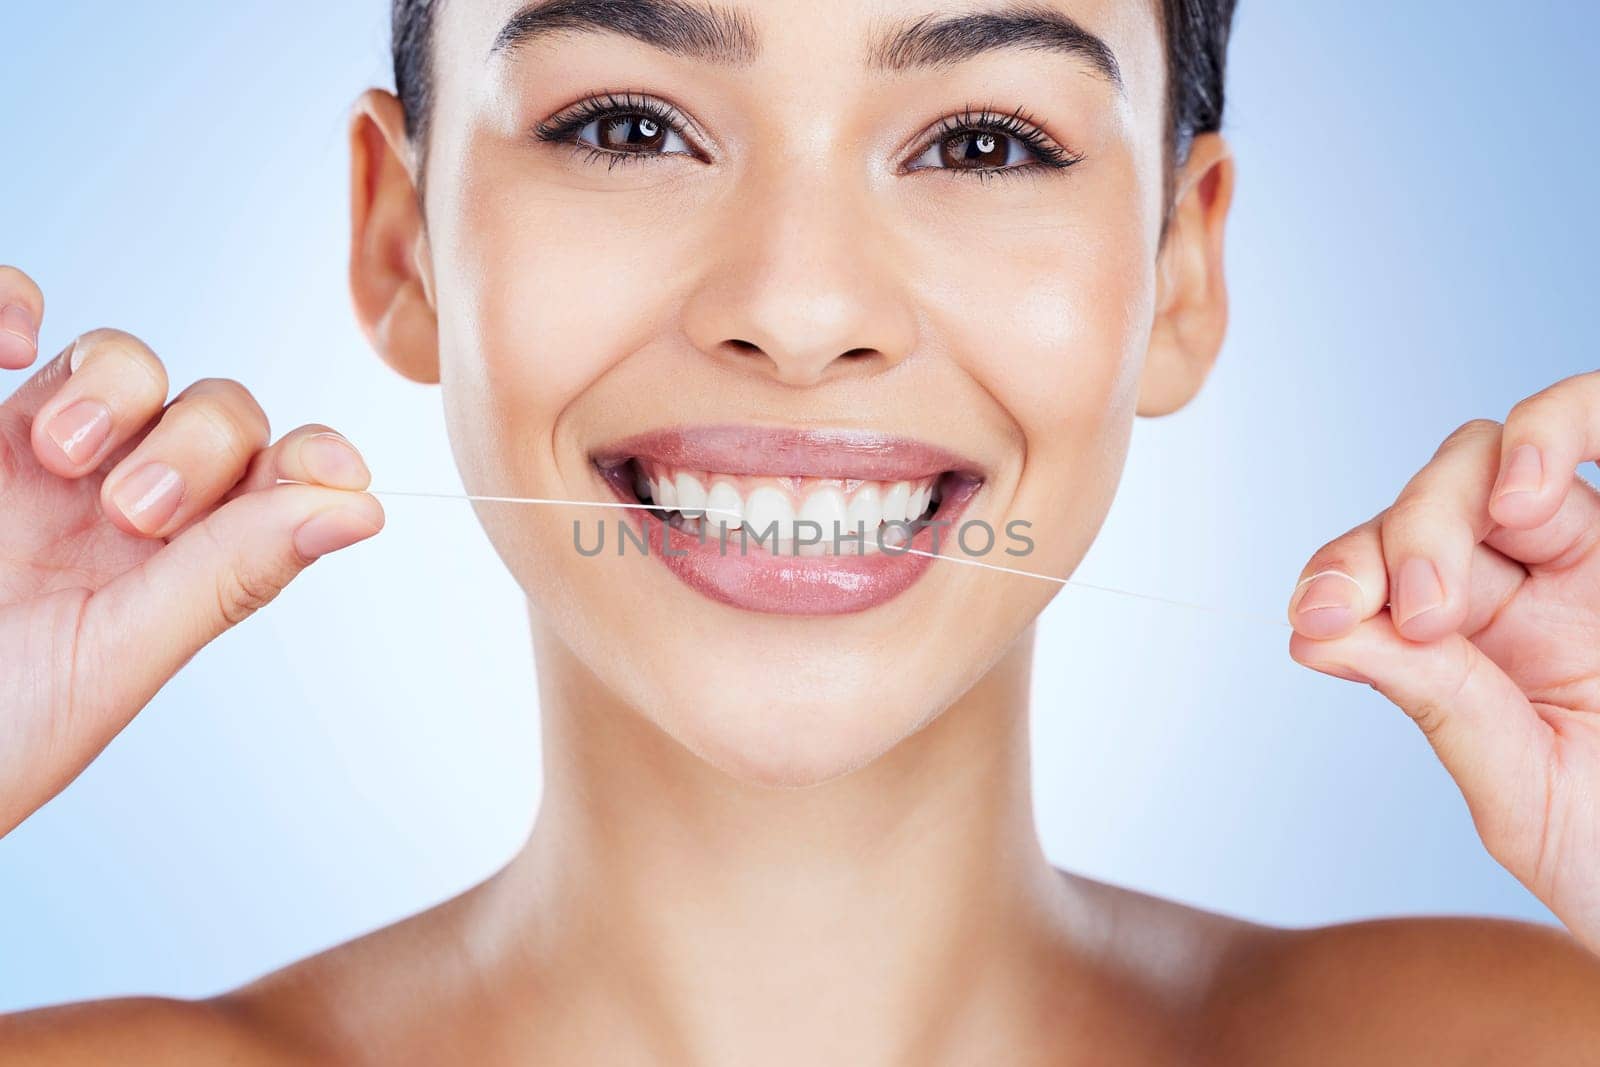 Face, flossing teeth and dental with woman, hygiene and beauty with grooming and mouth care on blue background. Hands, string and healthy gums with fresh breath, health and skin glow in portrait by YuriArcurs